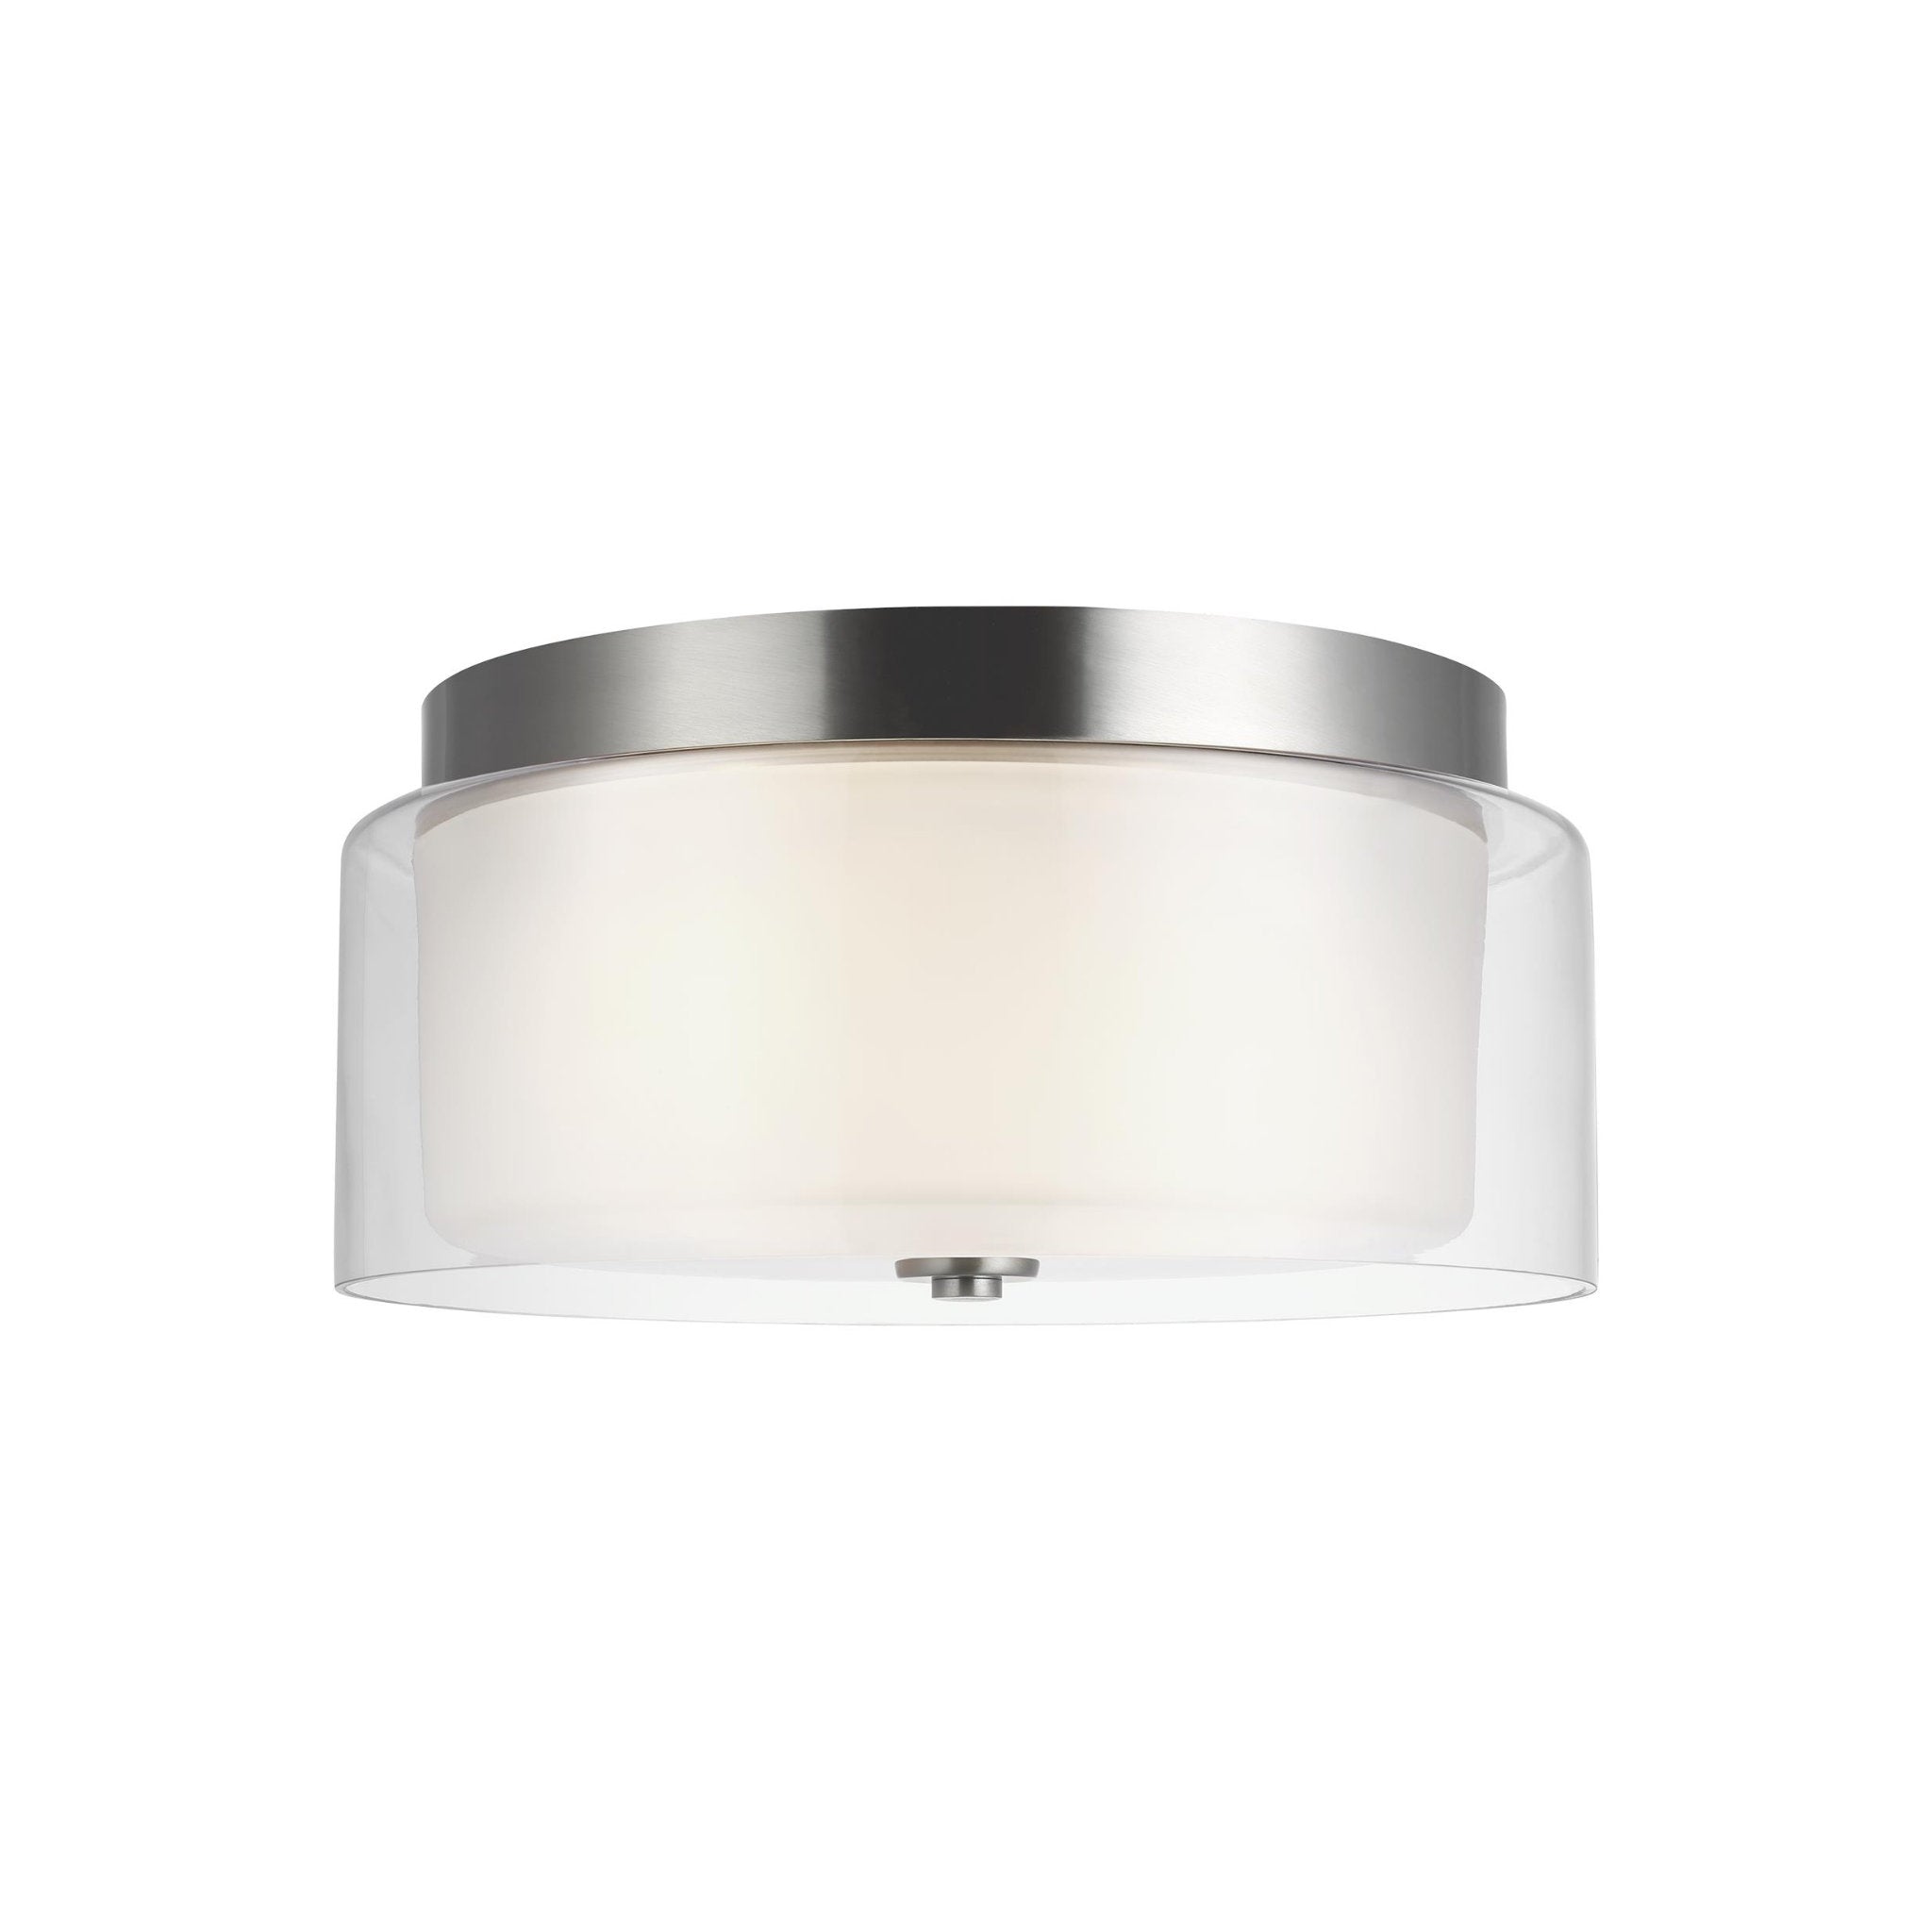 Elmwood Park Two Light Ceiling Flush Mount Traditional Fixture 6.125" Height Steel Round Satin Etched Shade in Brushed Nickel